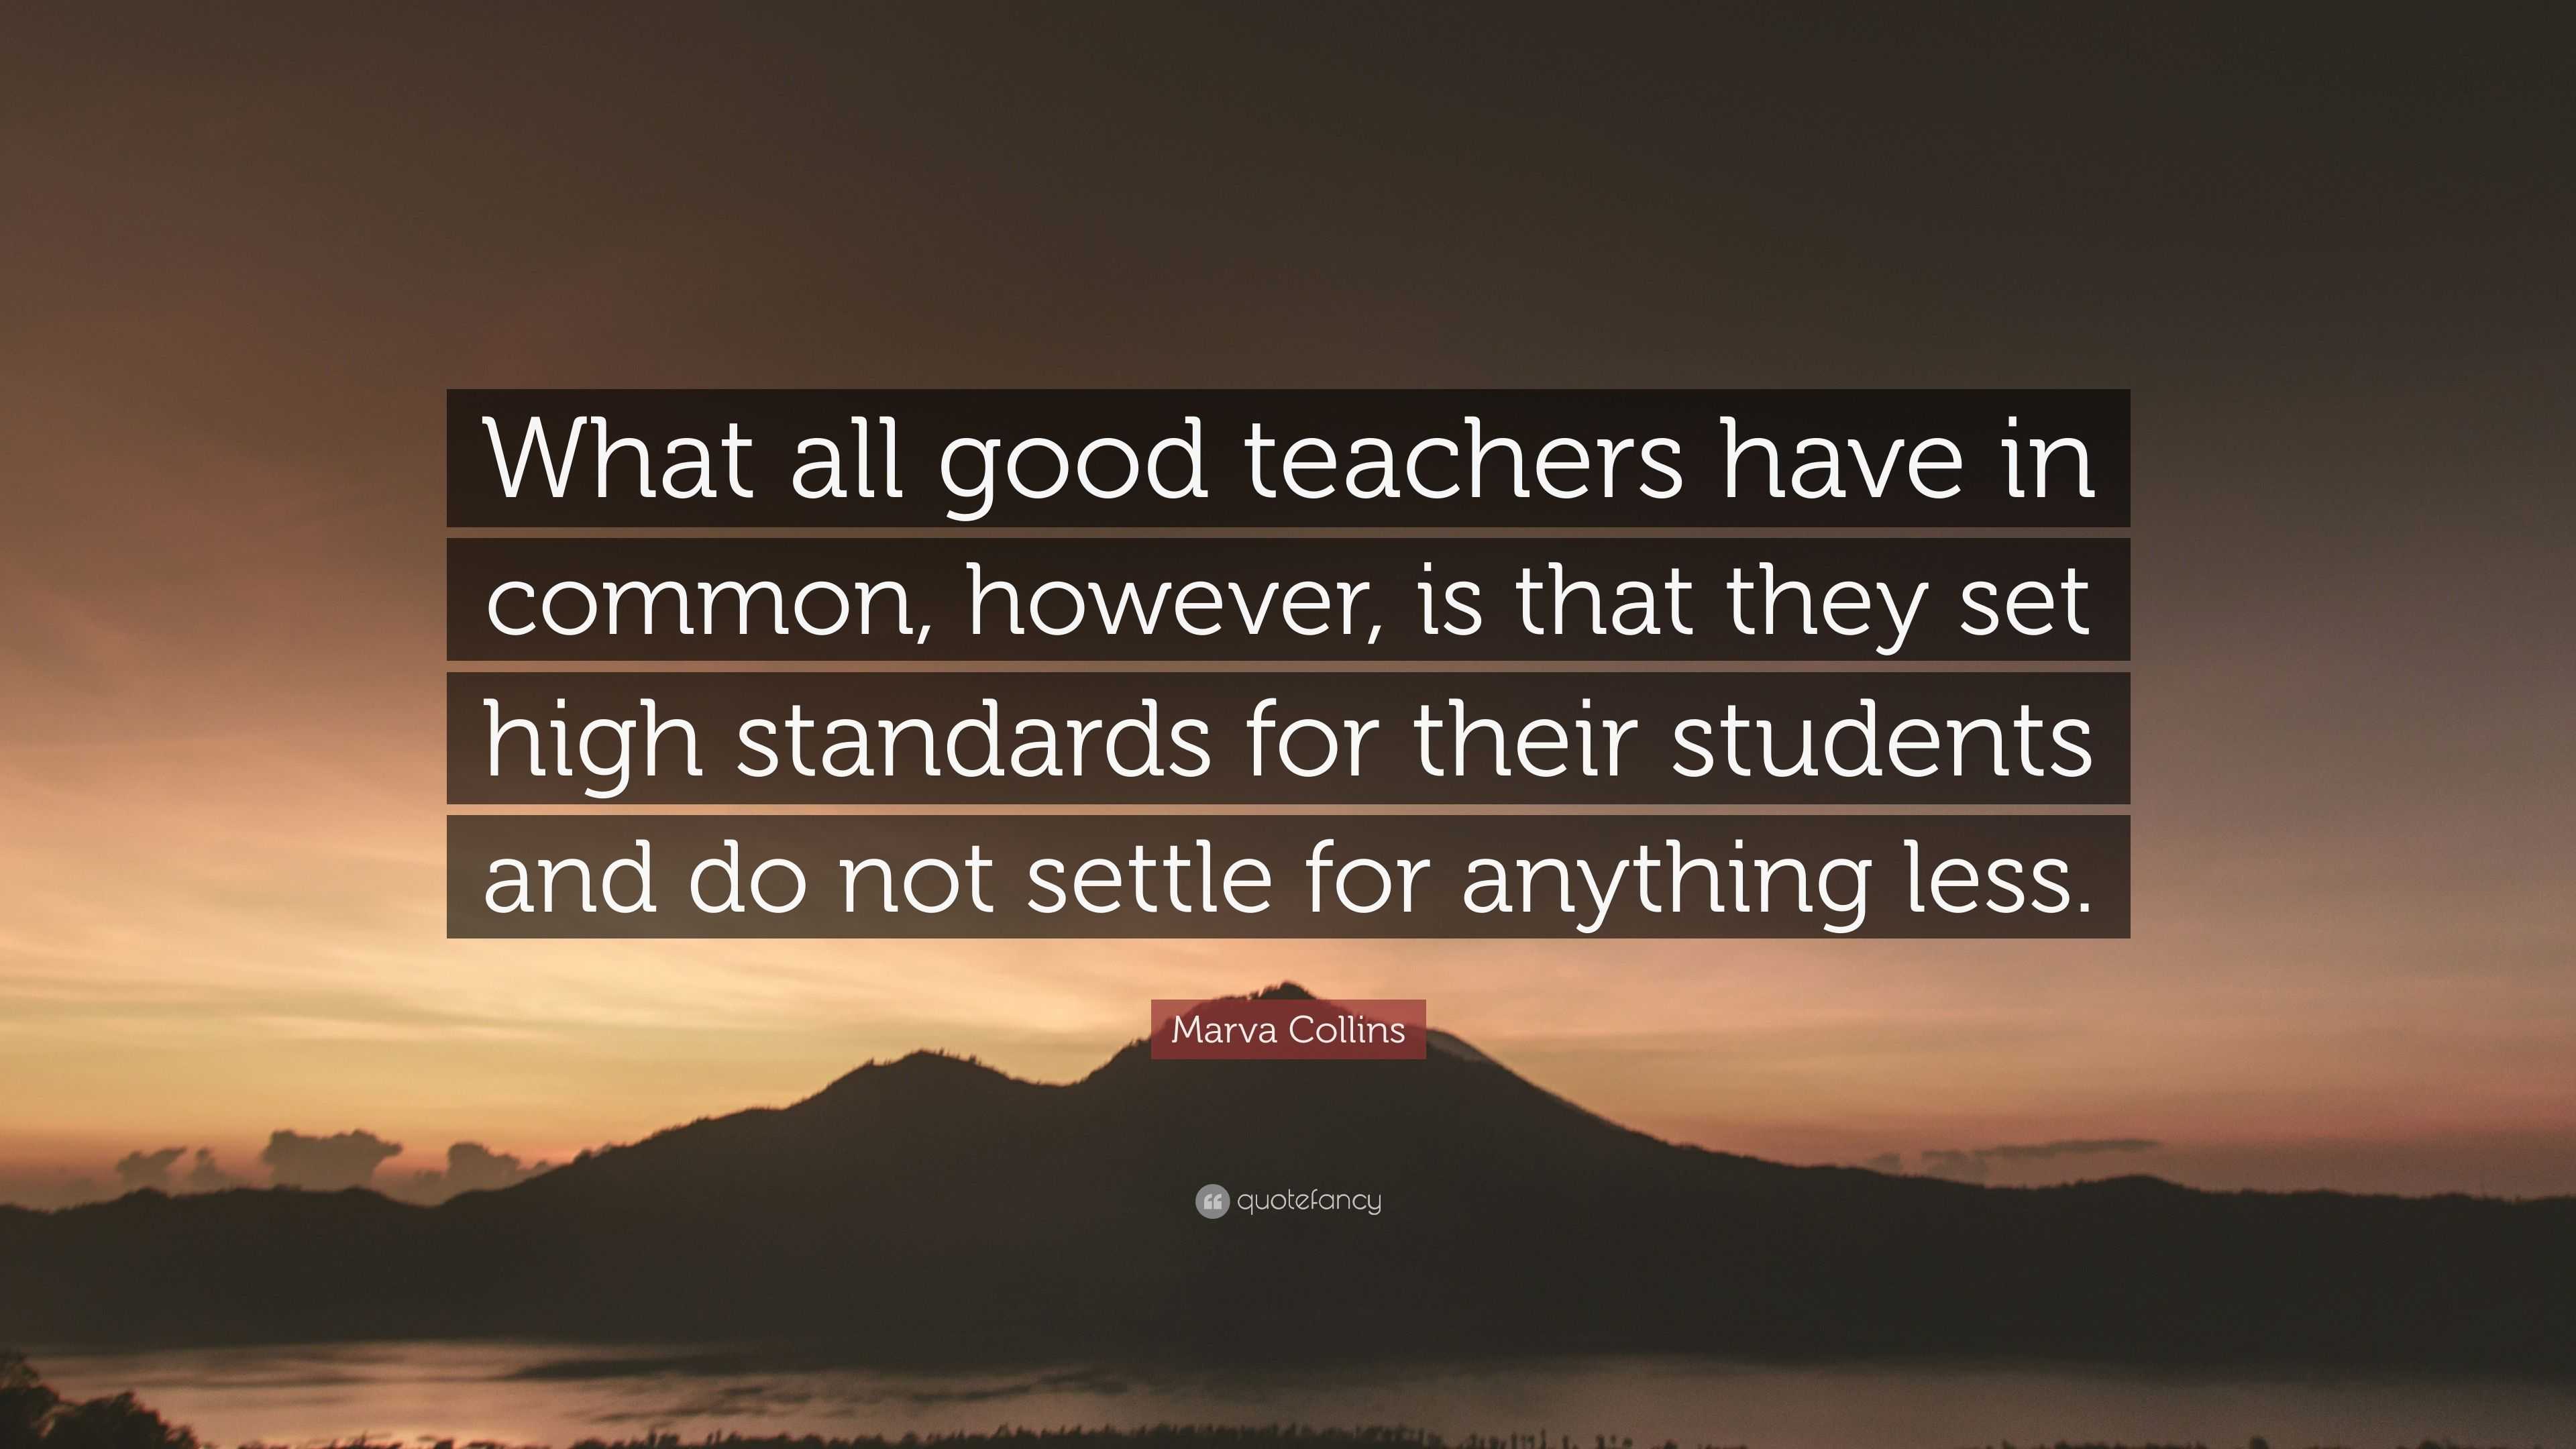 Marva Collins Quote: “What all good teachers have in common, however ...